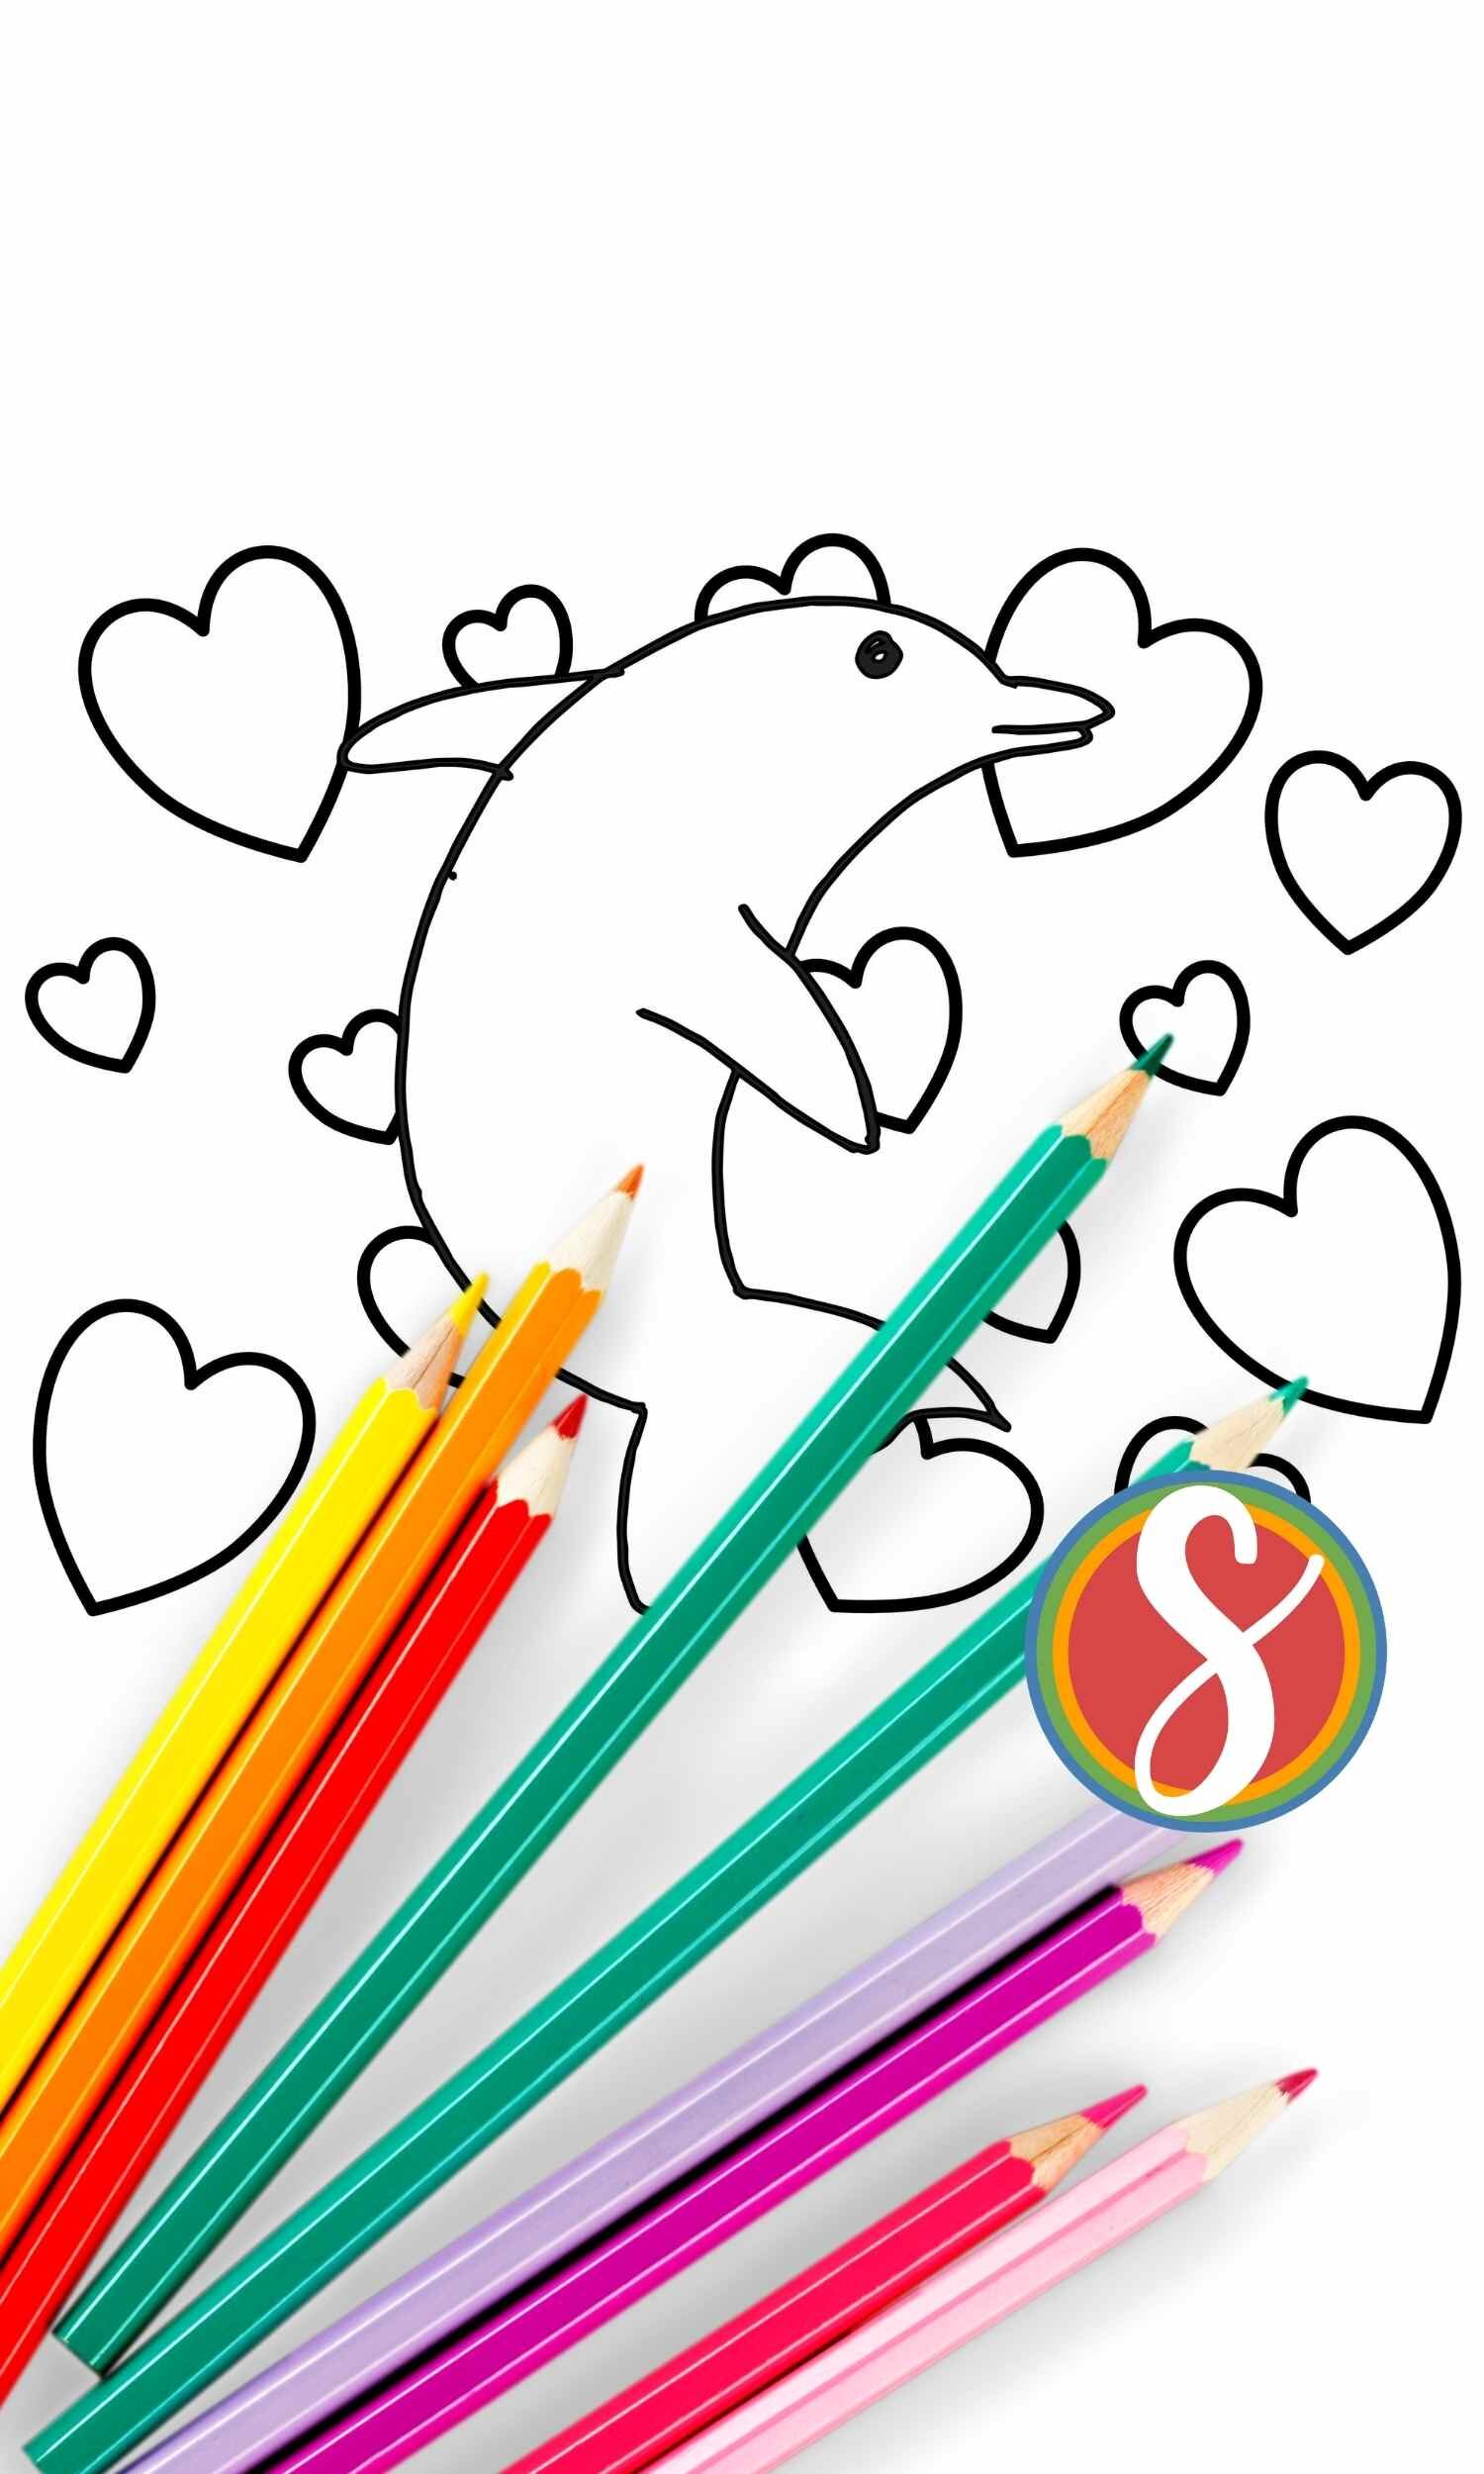 Free dolphin with hearts coloring page from Stevie Doodles - free to print and color today!